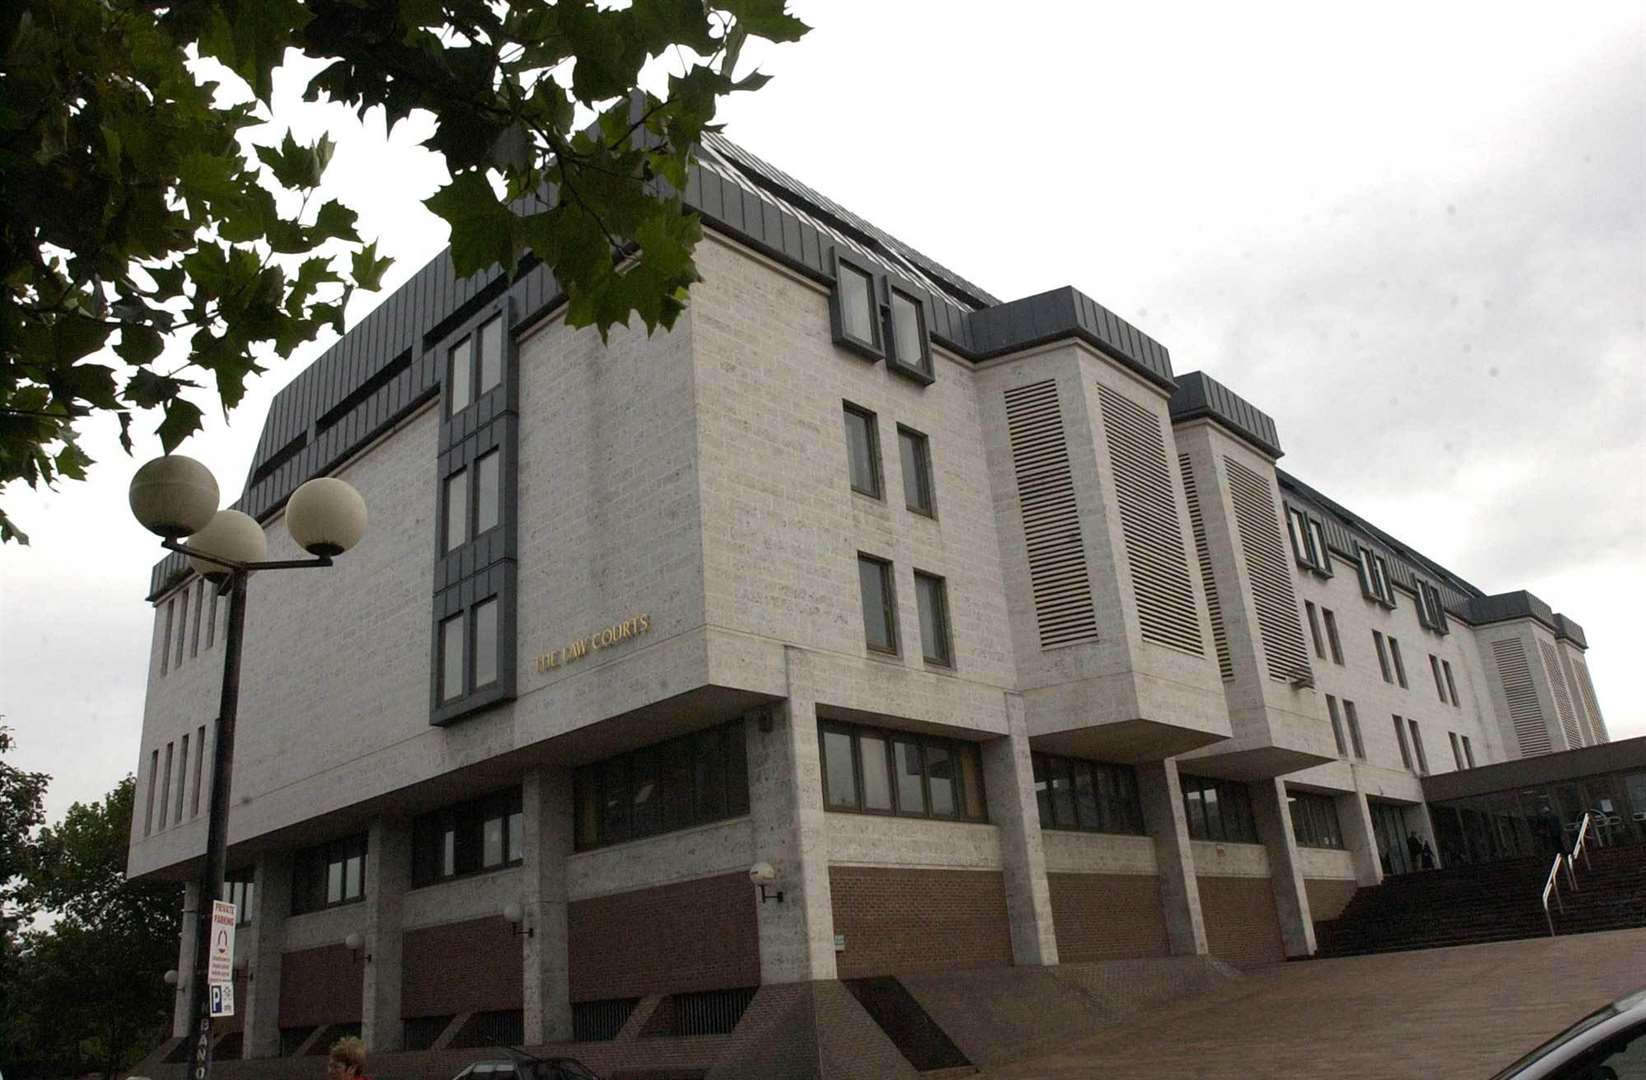 The case will be heard at Maidstone Crown Court